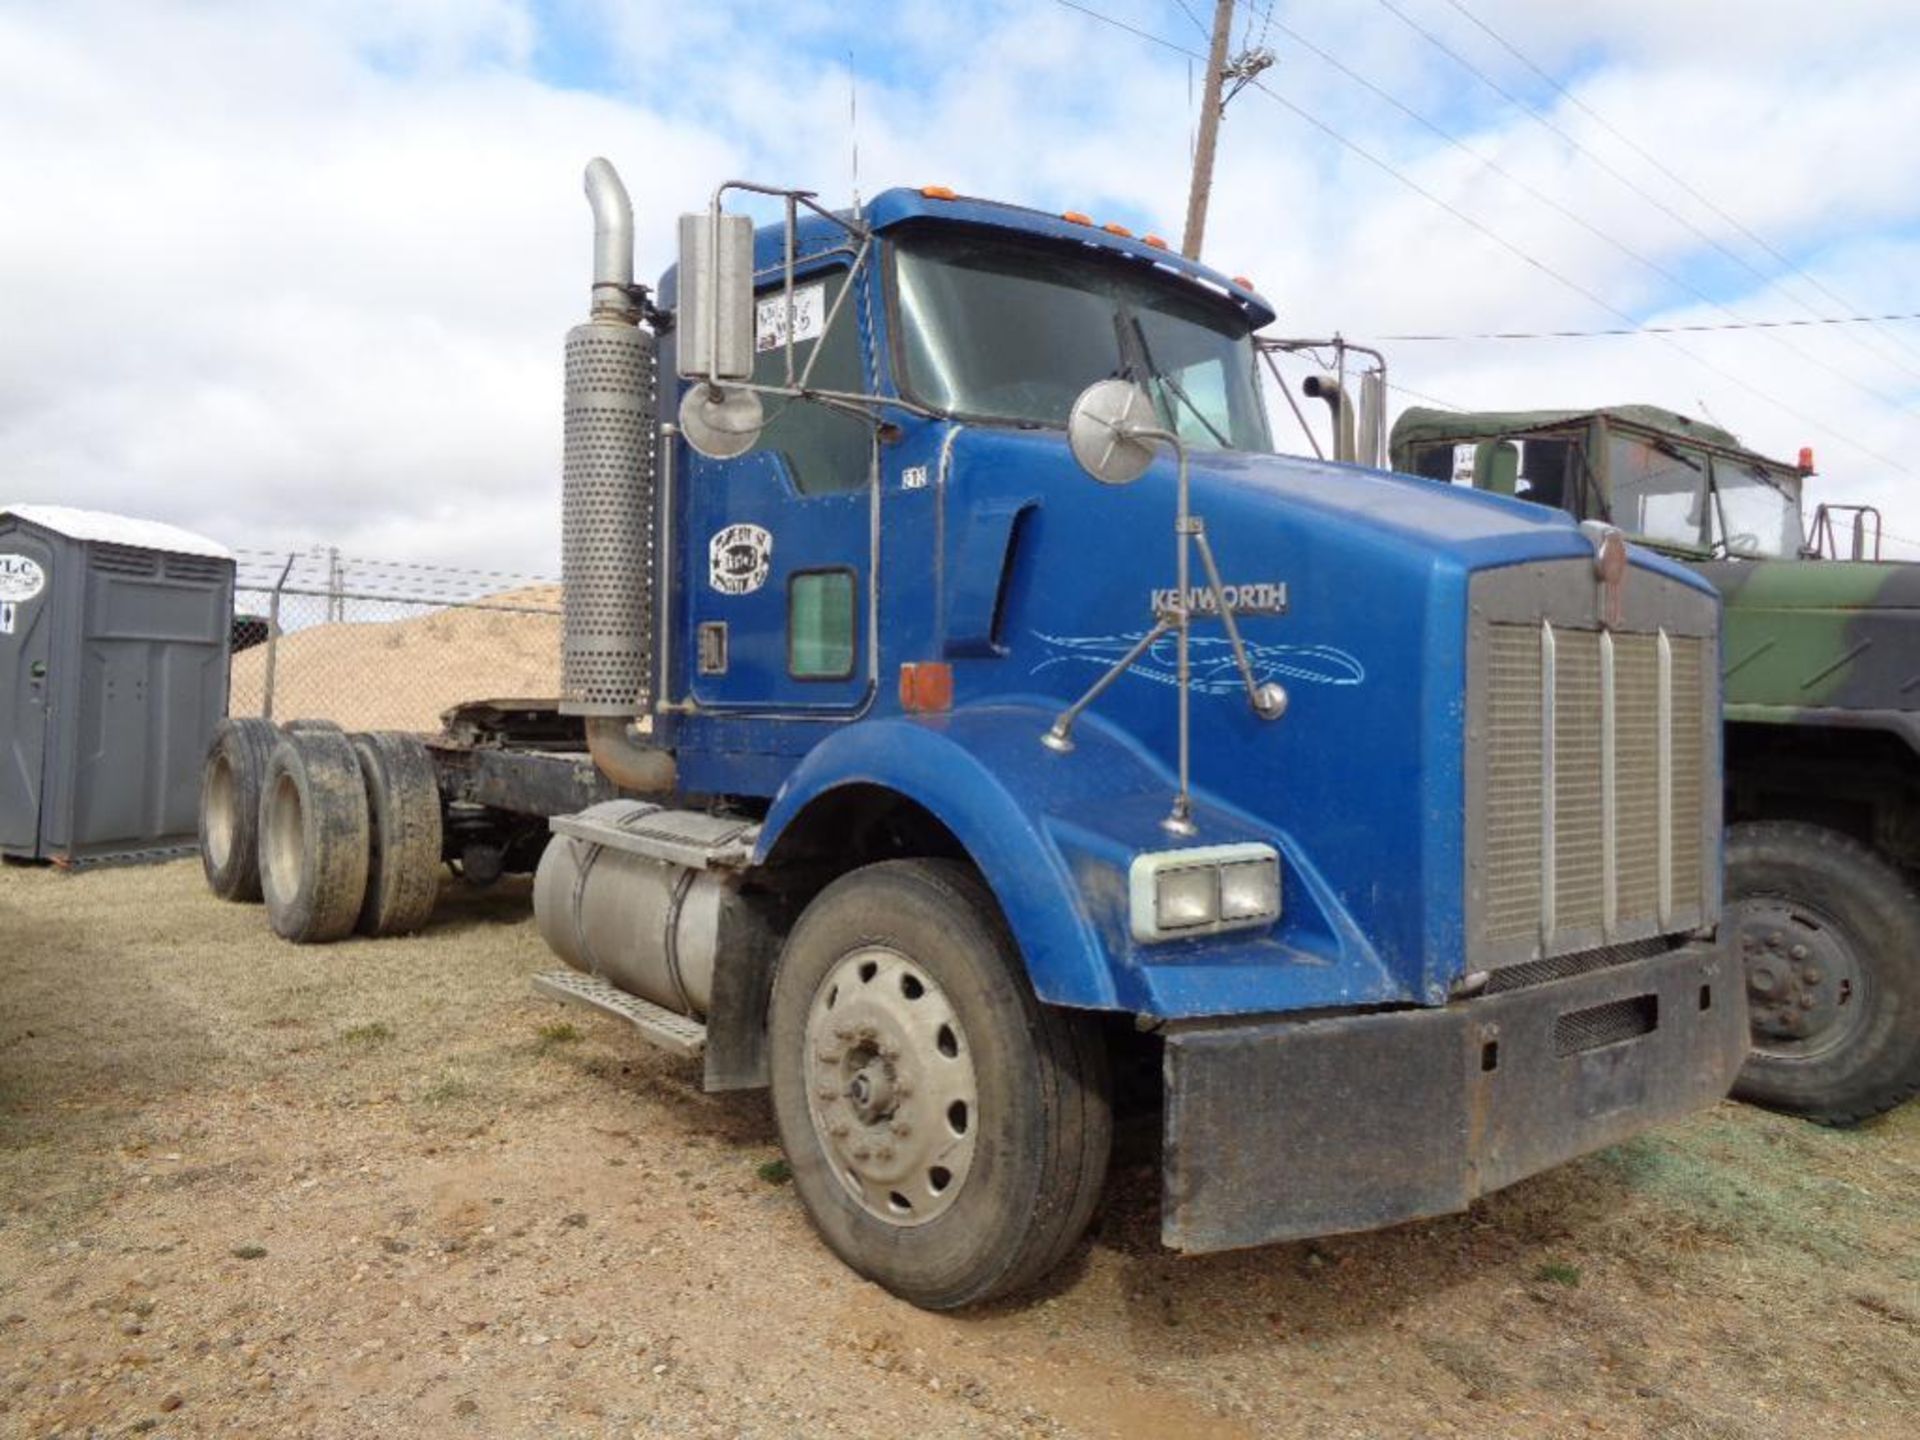 1999 Kenworth T800 t/a Truck Tractor s/n 1xkdd09x3xr816250, Daycab,cummins eng,10 spd,od reads - Image 2 of 5